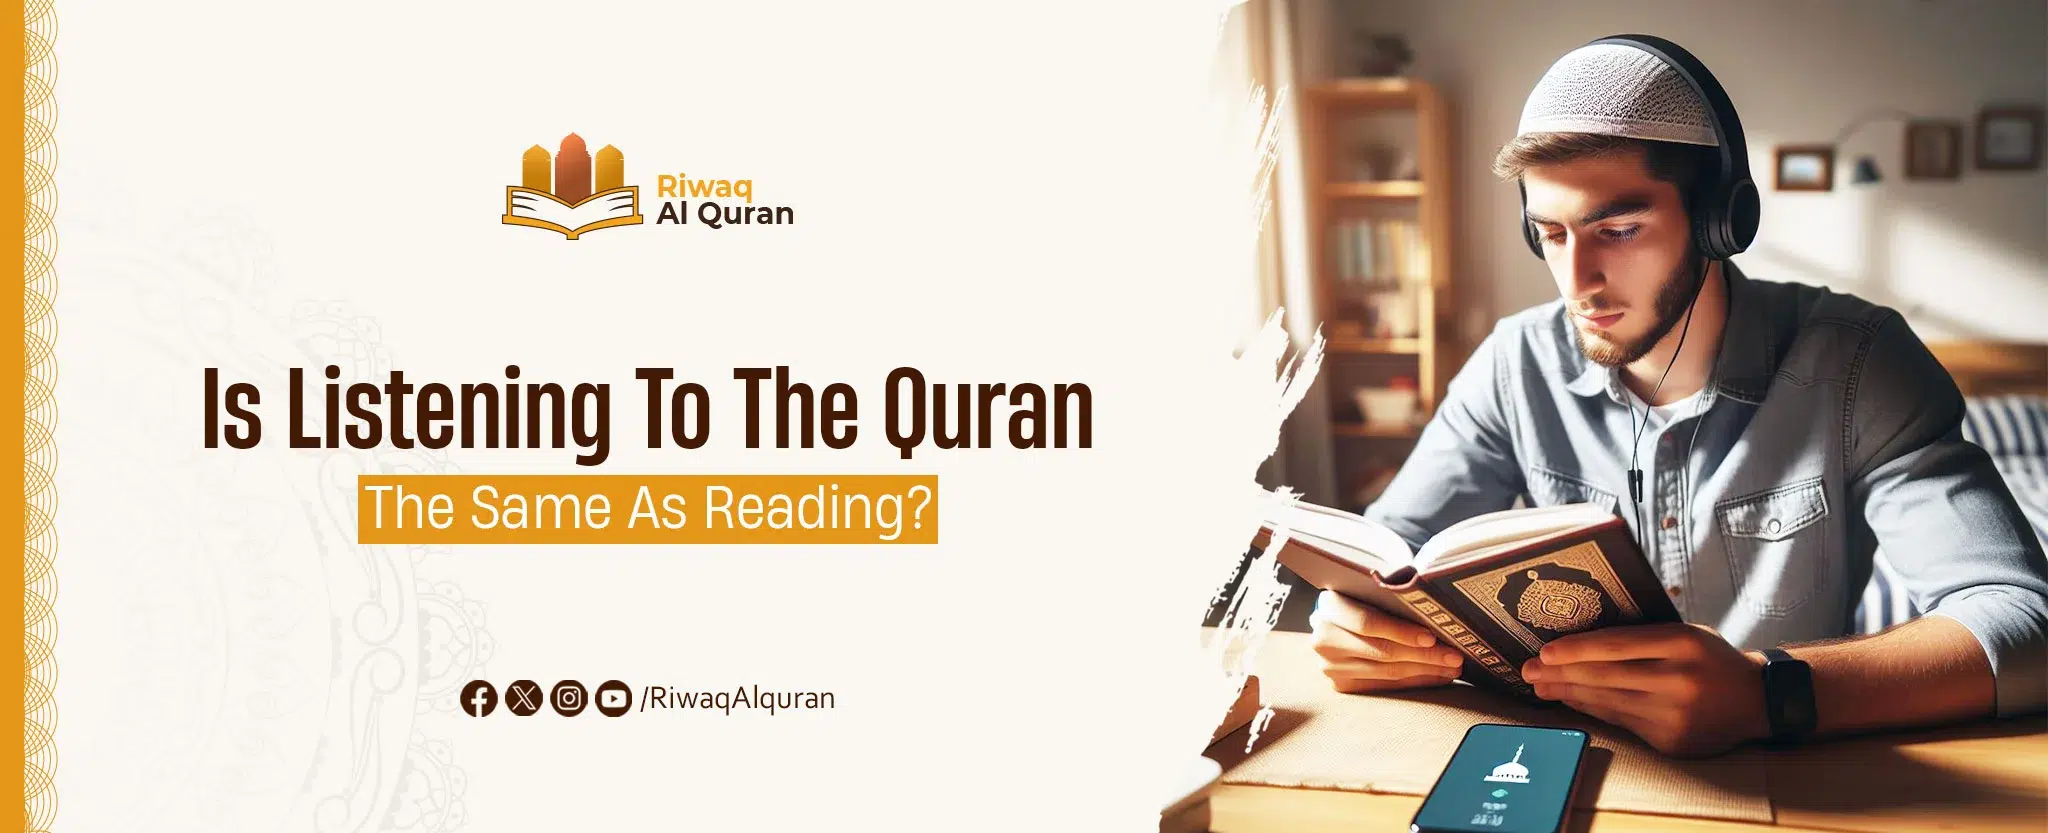 Is Listening To The Quran The Same As Reading